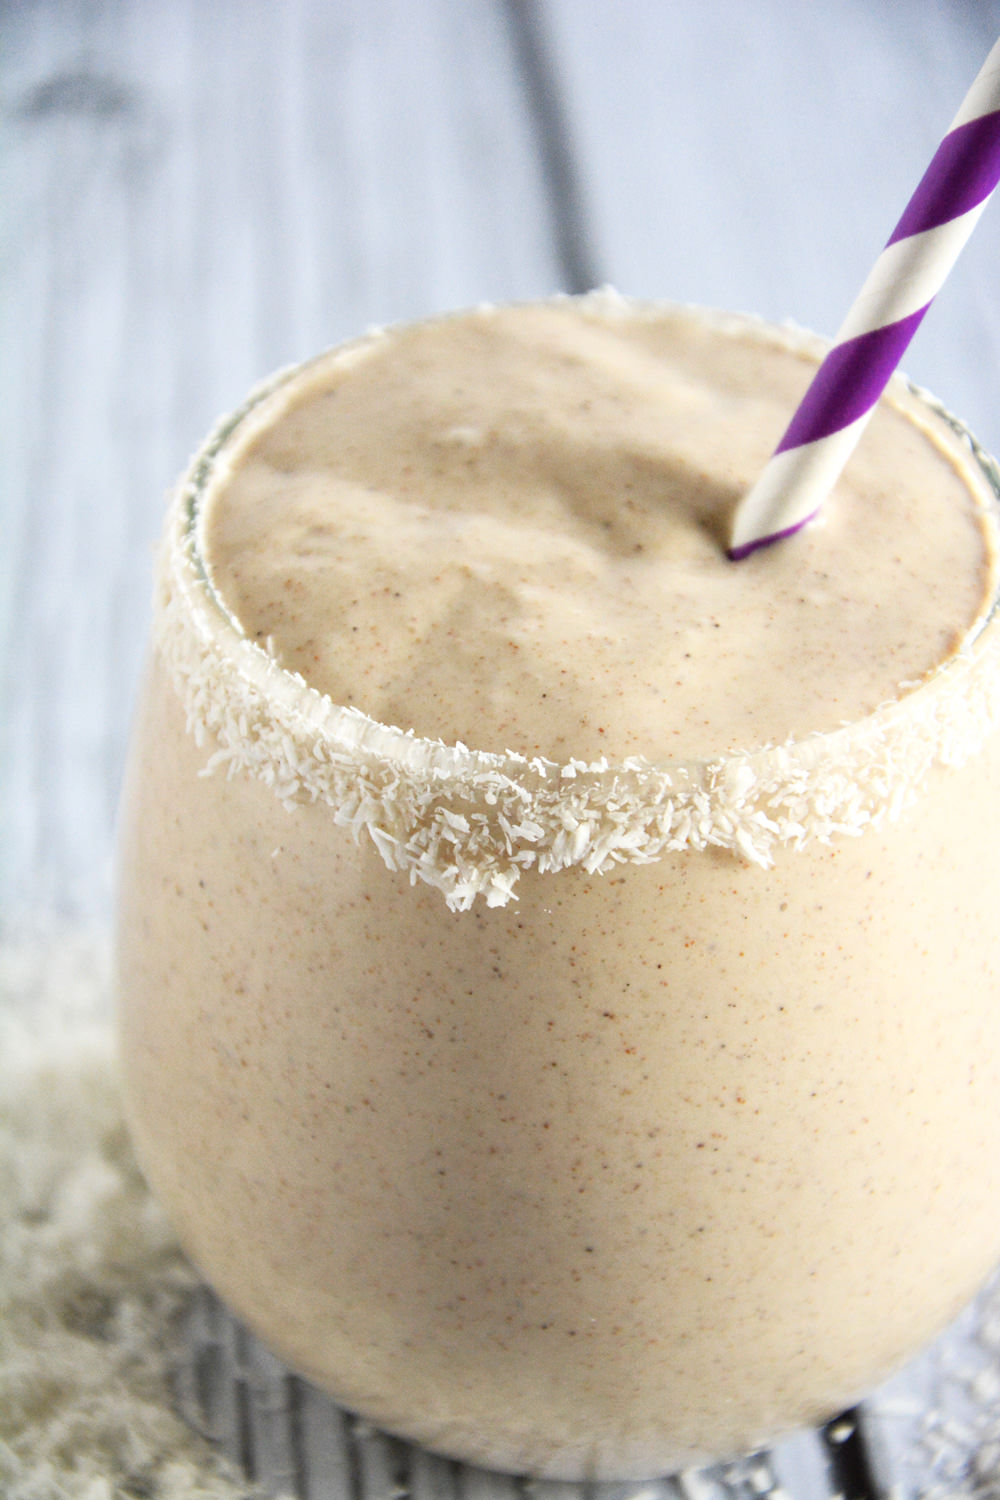 Coconut, Vanilla & Almond Butter Smoothie is a velvety smoothie made with coconut milk, vanilla, almond butter and sweetened with dates!